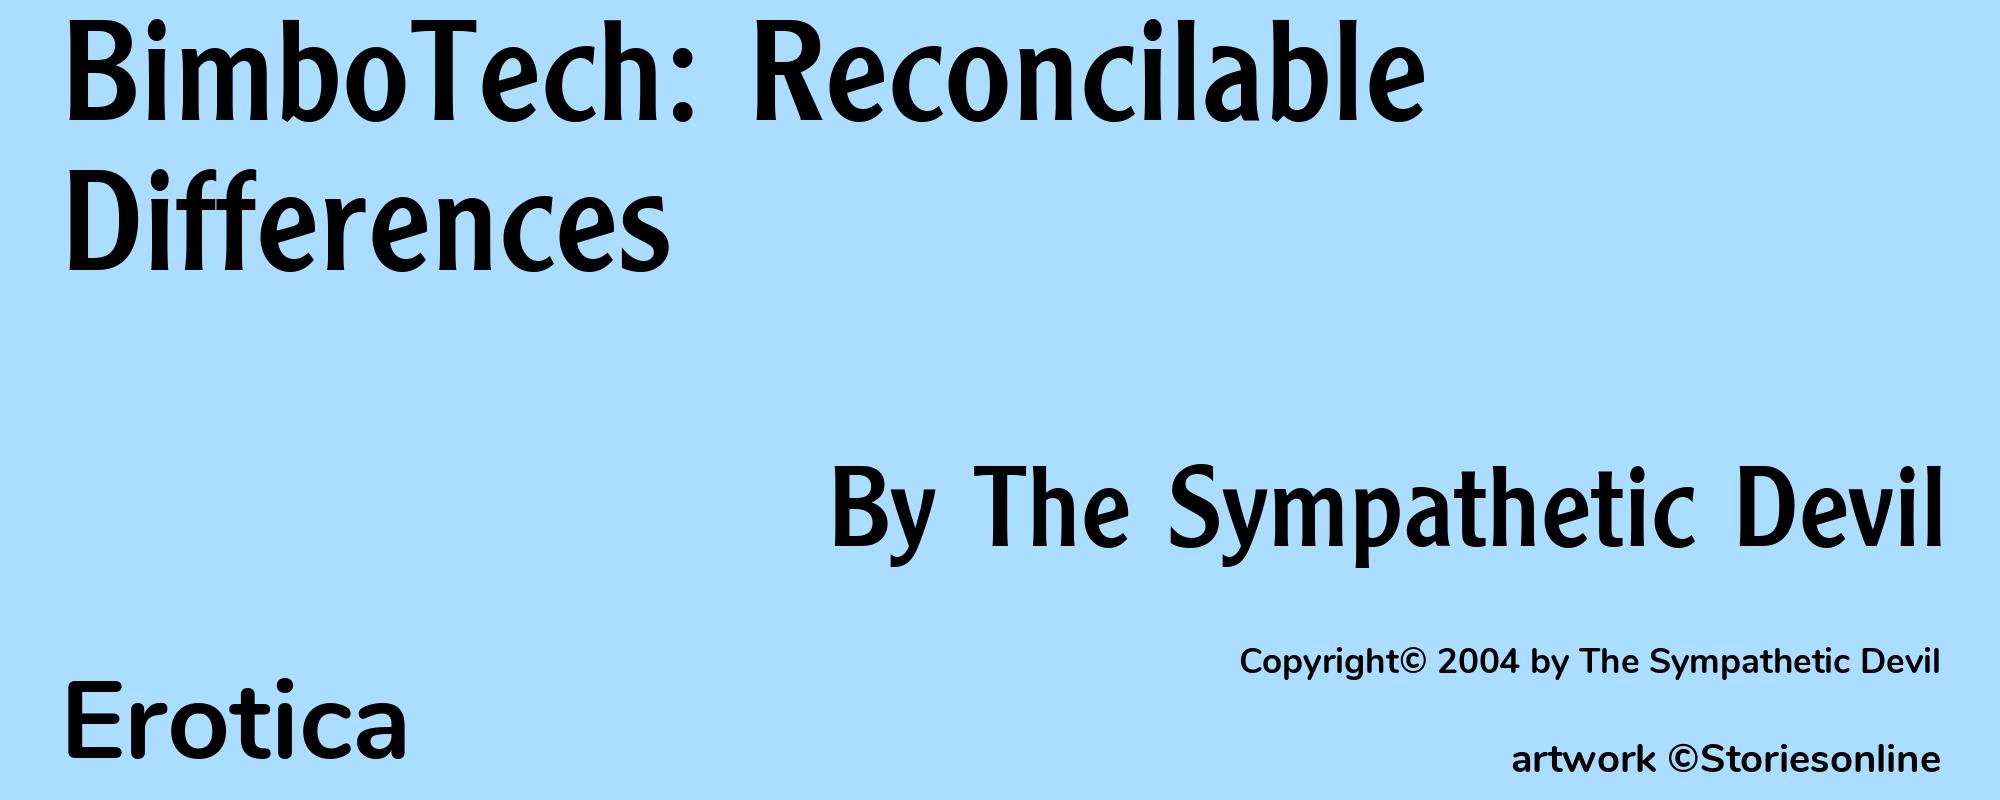 BimboTech: Reconcilable Differences - Cover